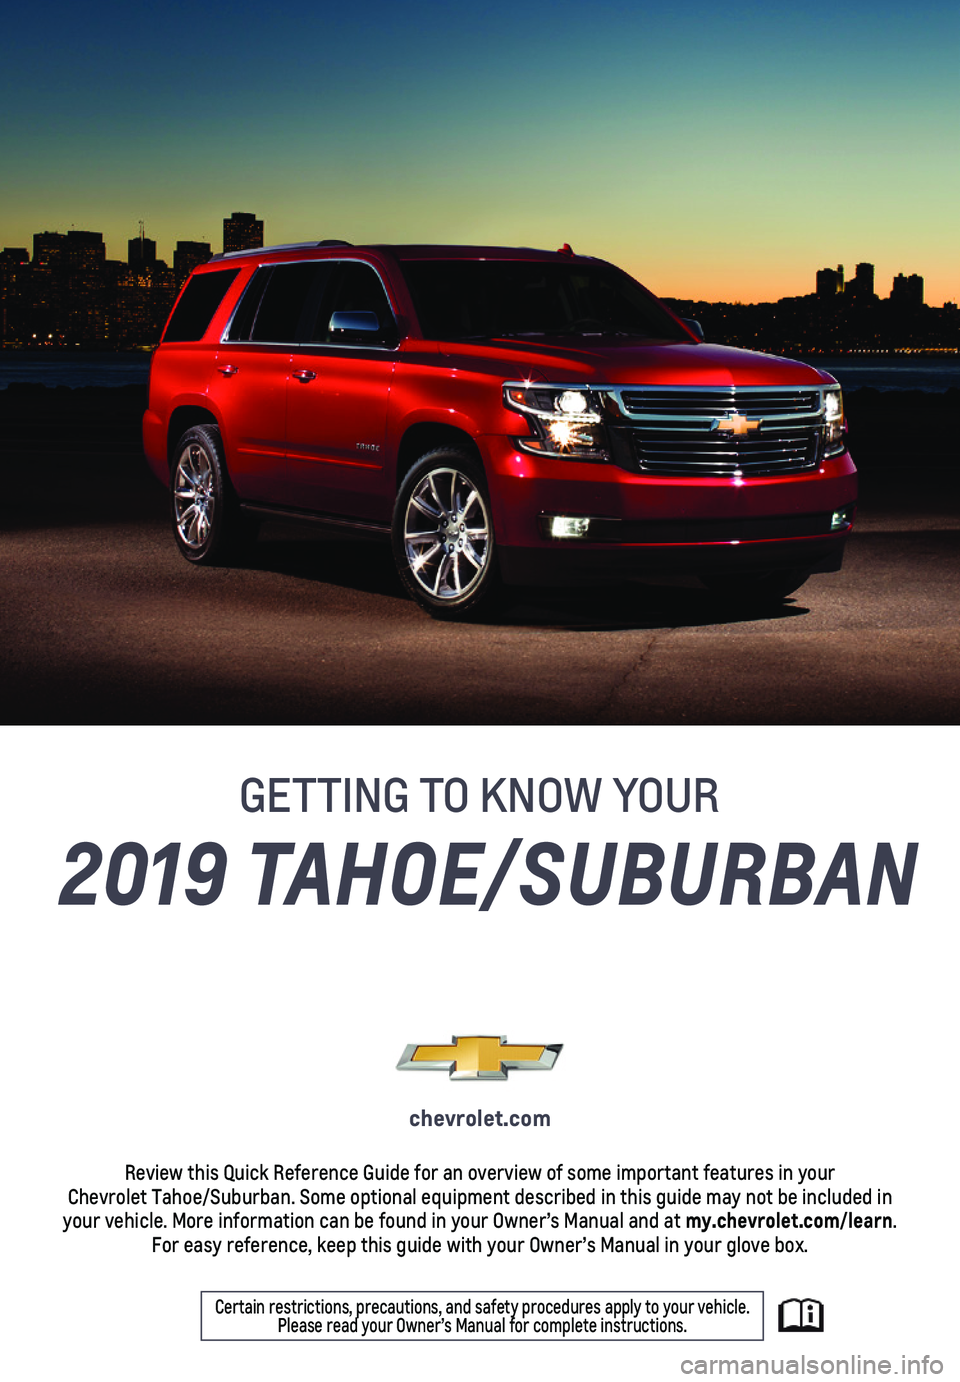 CHEVROLET SUBURBAN 2019  Get To Know Guide 1
2019 TAHOE/SUBURBAN
chevrolet.com
Review this Quick Reference Guide for an overview of some important feat\
ures in your  Chevrolet Tahoe/Suburban. Some optional equipment described in this guid\
e 